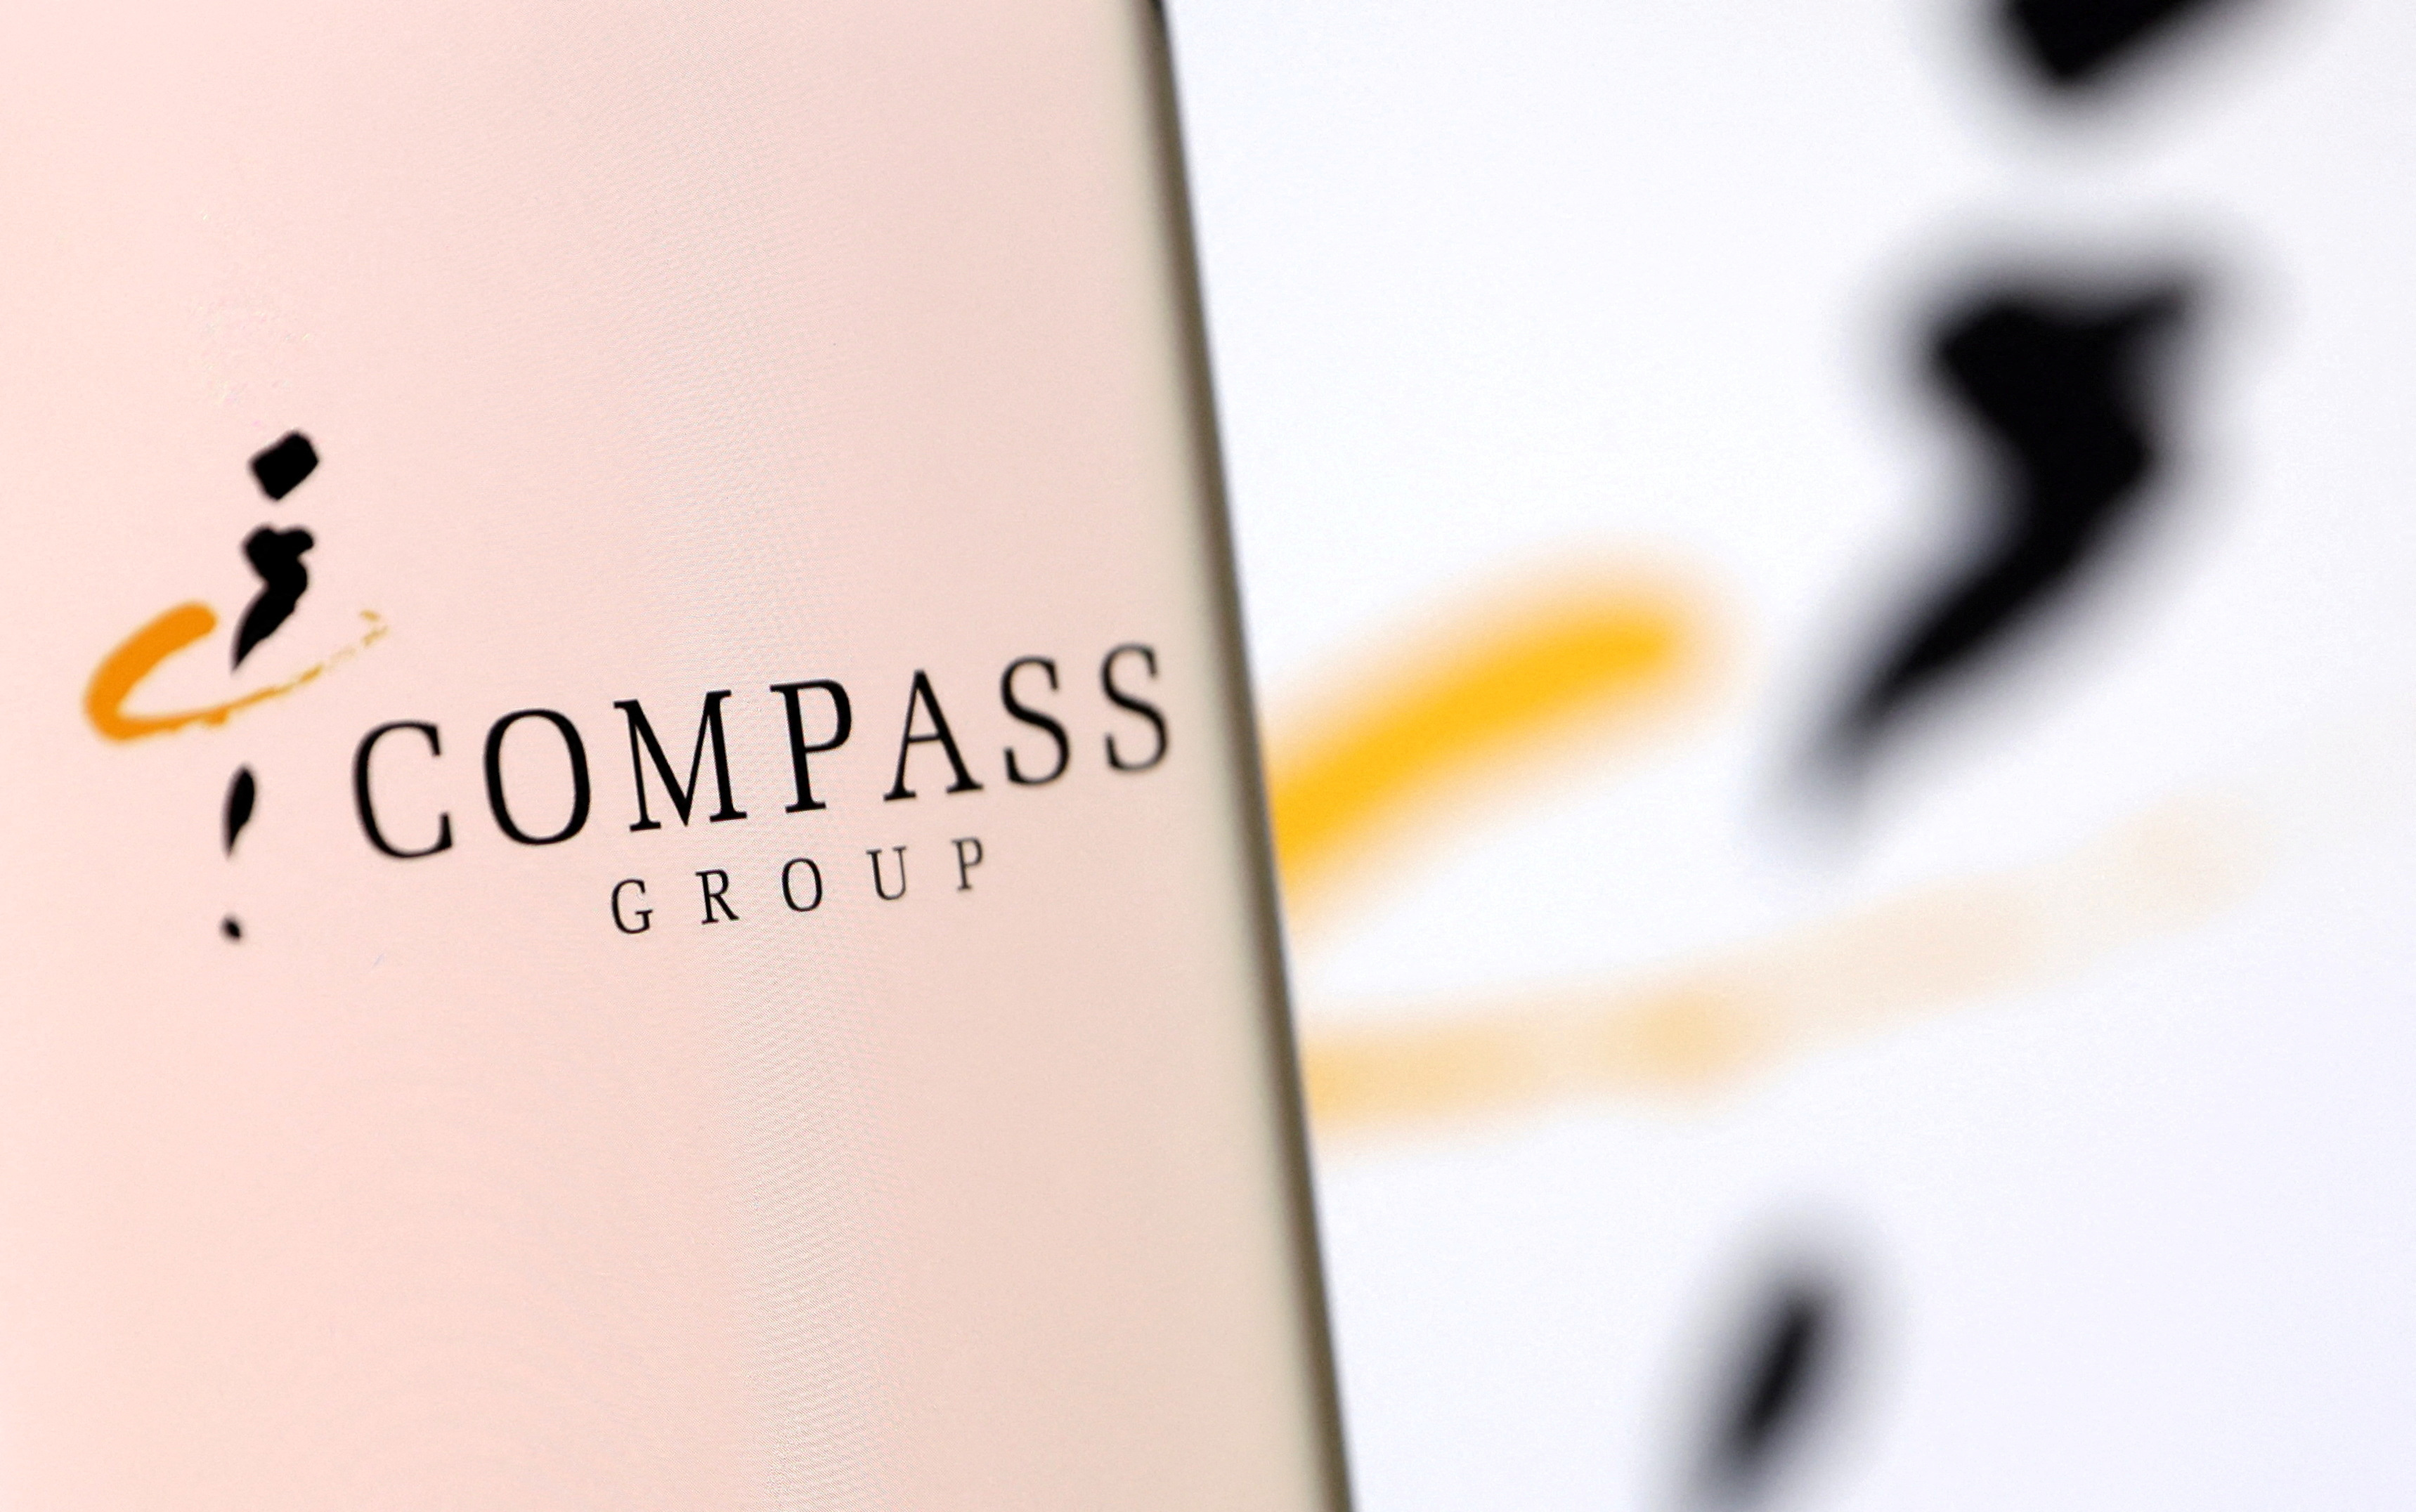 Illustration shows smartphone with Compass Group's logo displayed